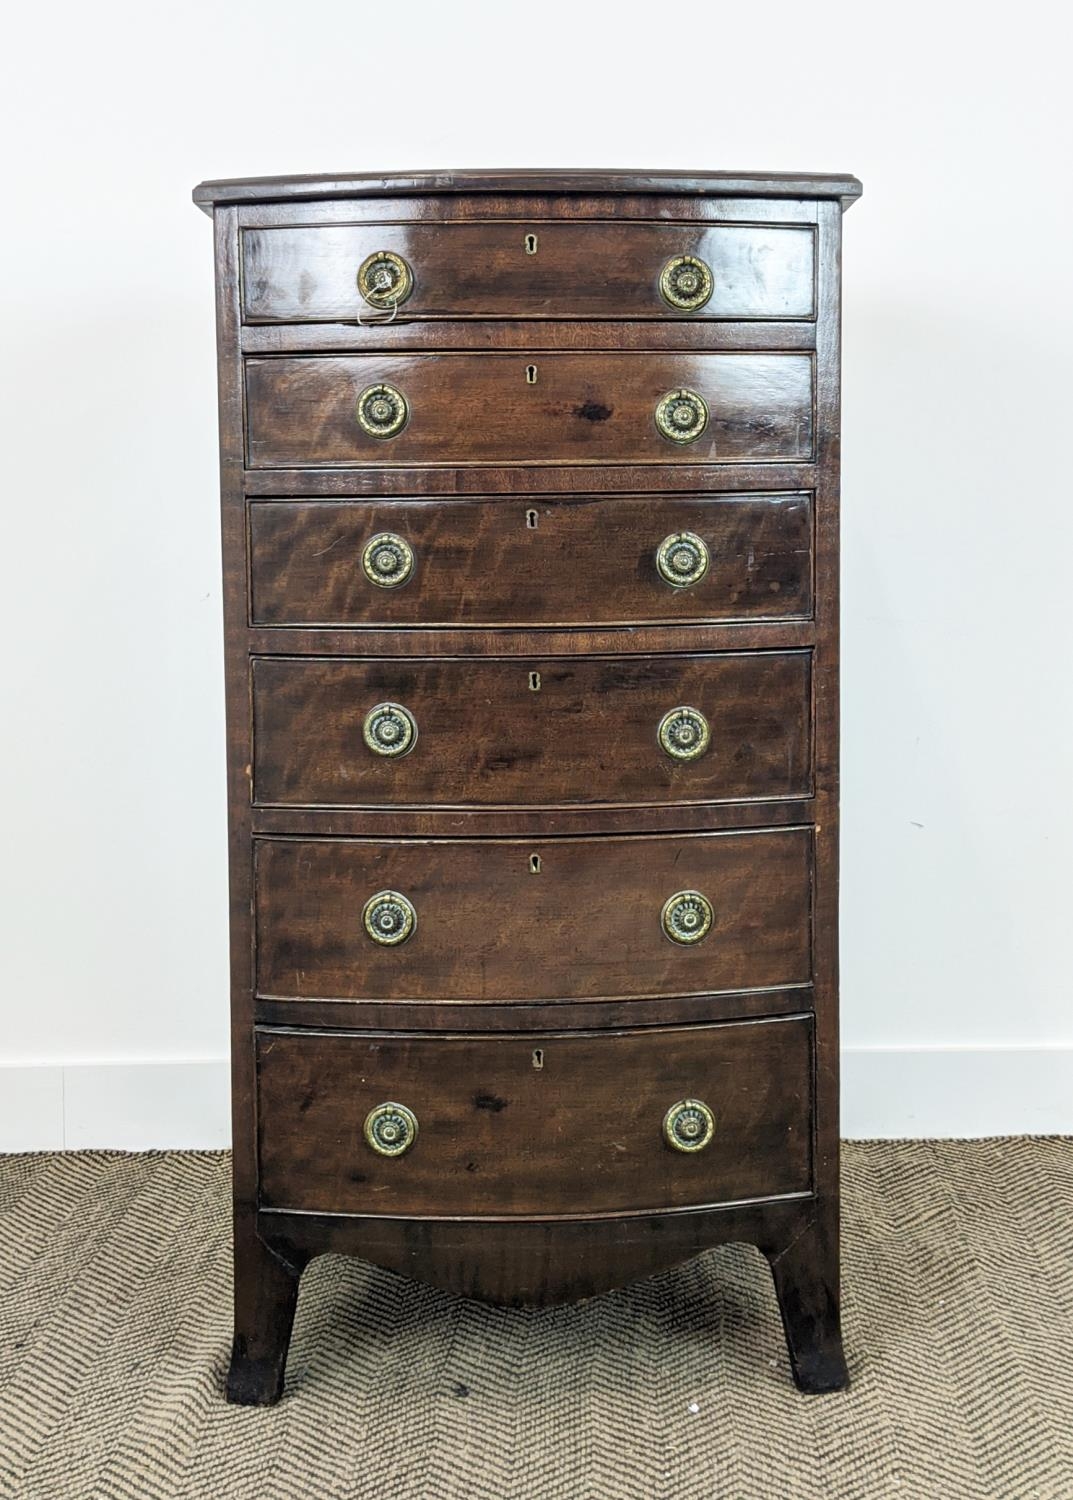 BOWFRONT NARROW CHEST, early 20th century Georgian revival mahogany with six drawers, 115cm H x 61cm